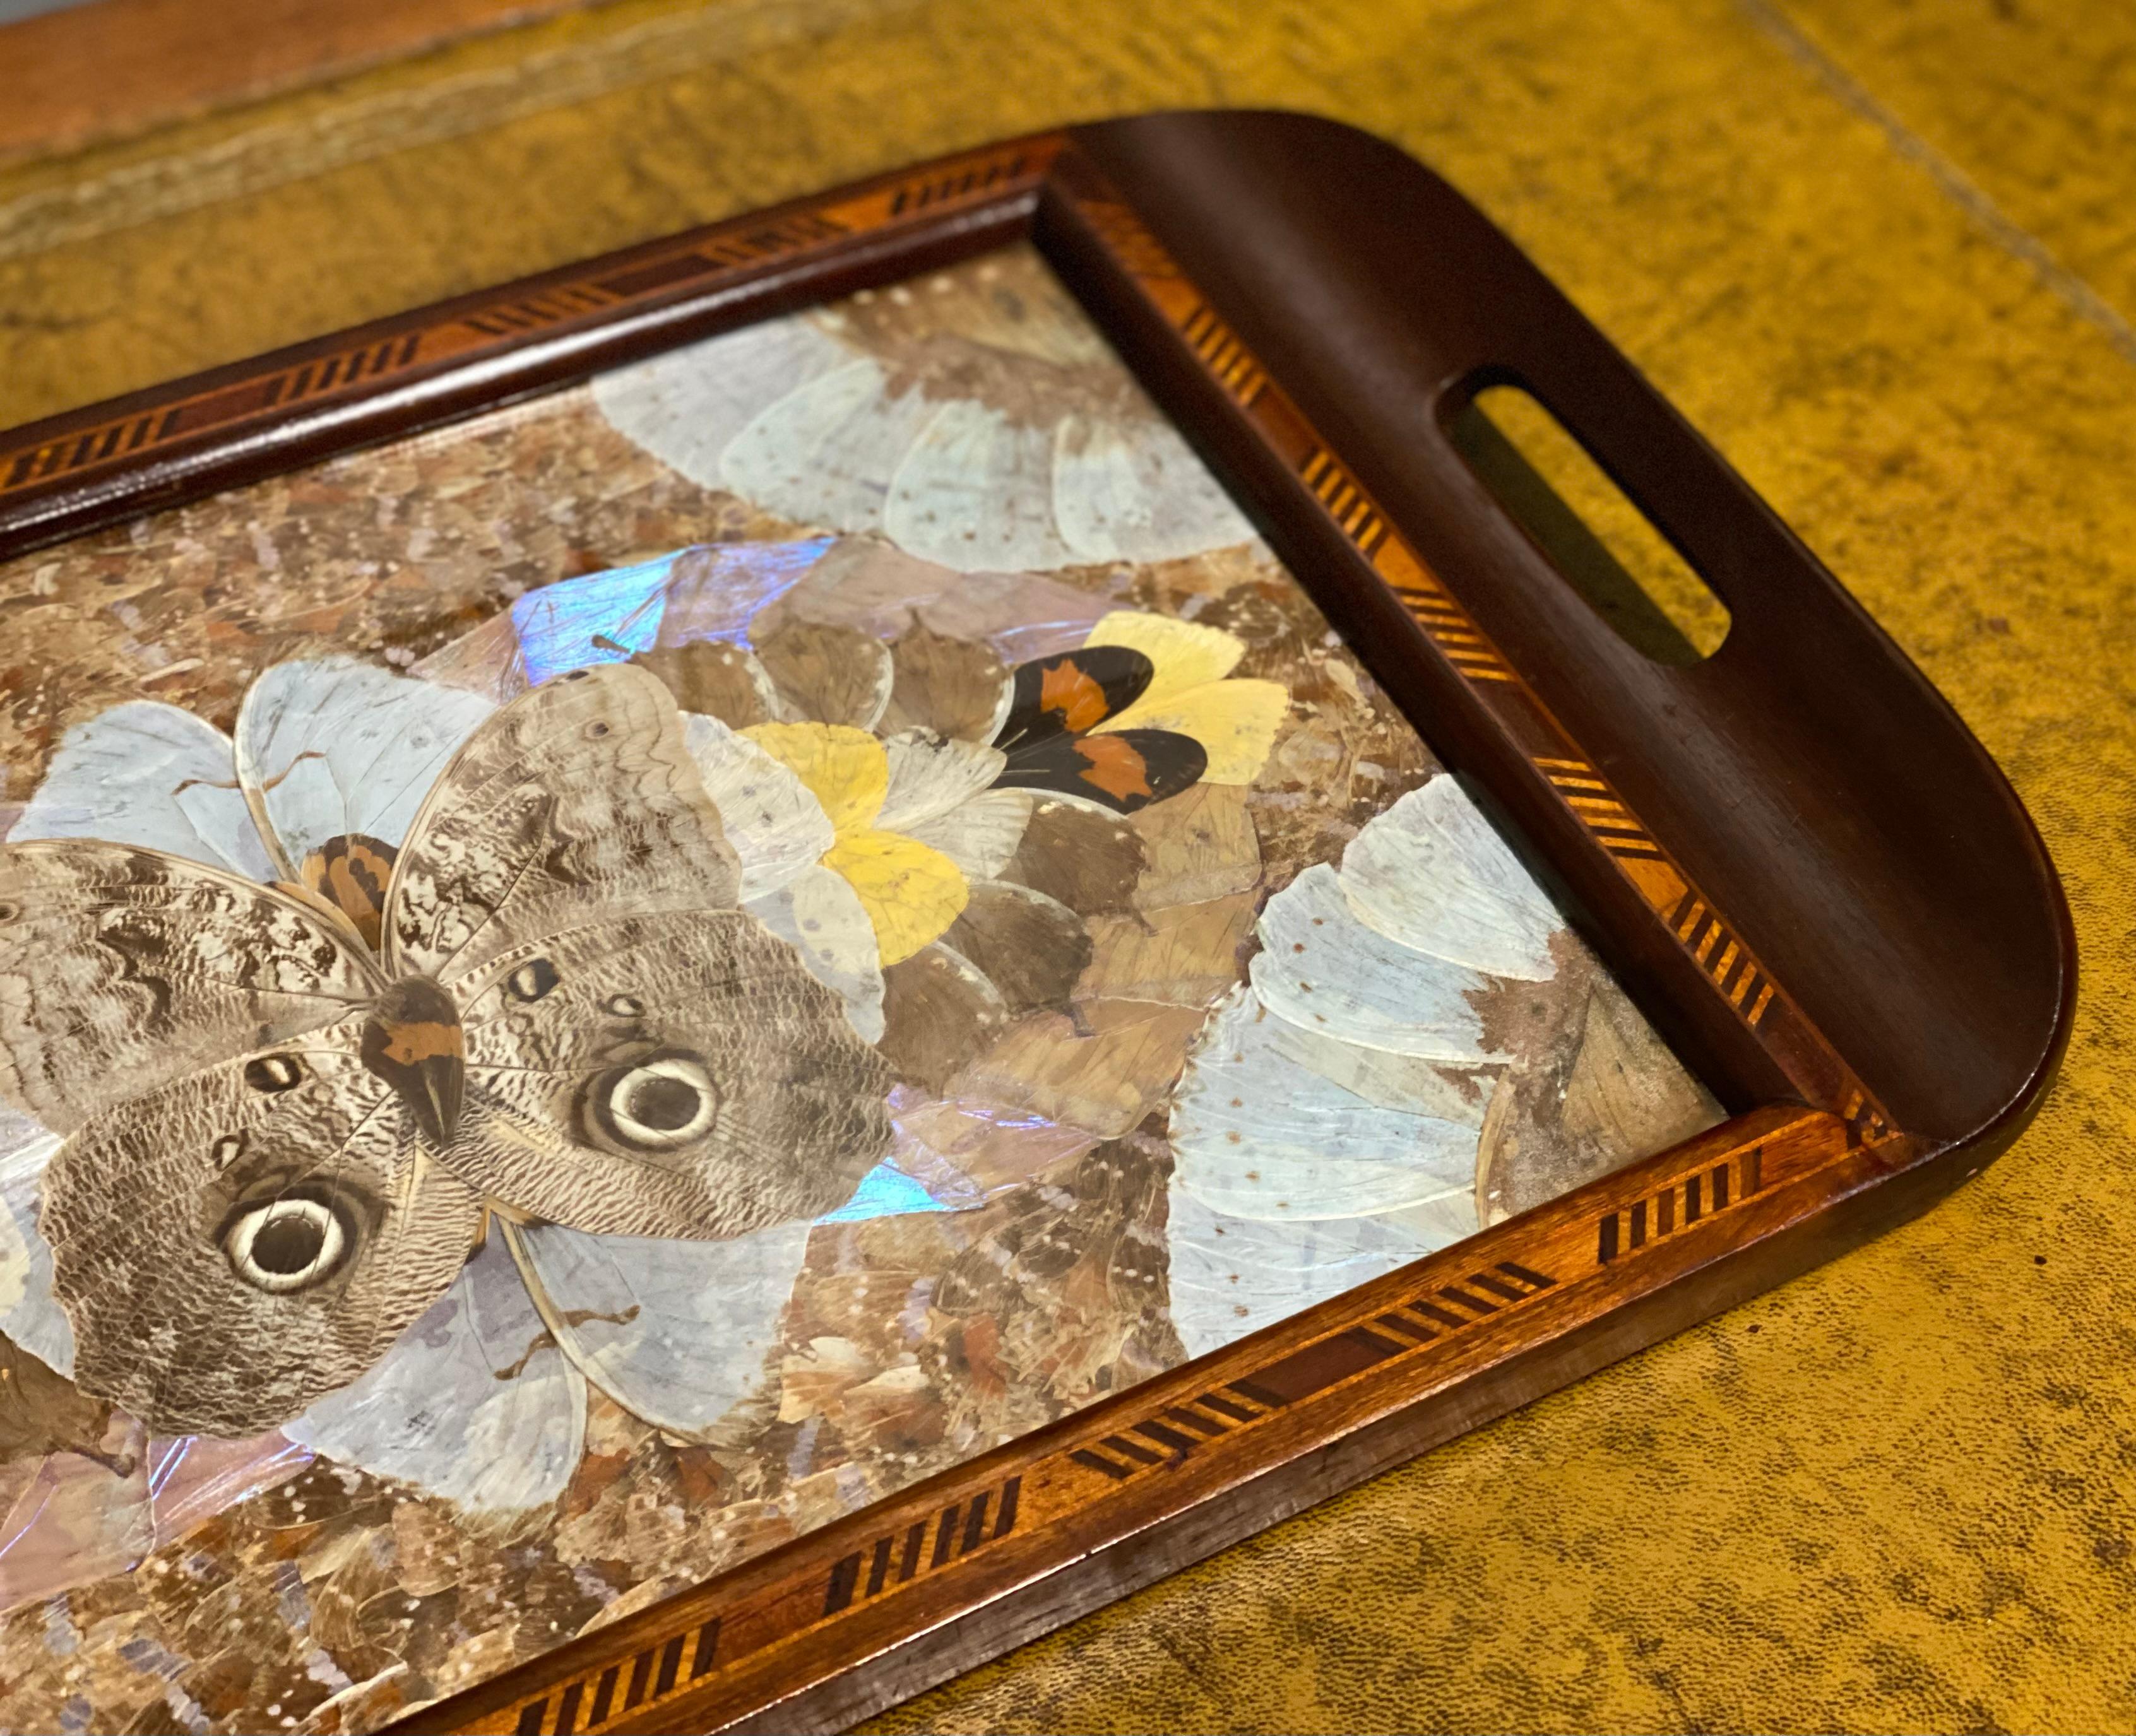 
We are excited to present this vintage Brazilian inlaid wood tray with real Morpho butterfly wings.

This vintage tray features a geometric pattern made from the wings of the brilliant iridescent Blue Morpho butterfly.
Turn the tray and watch